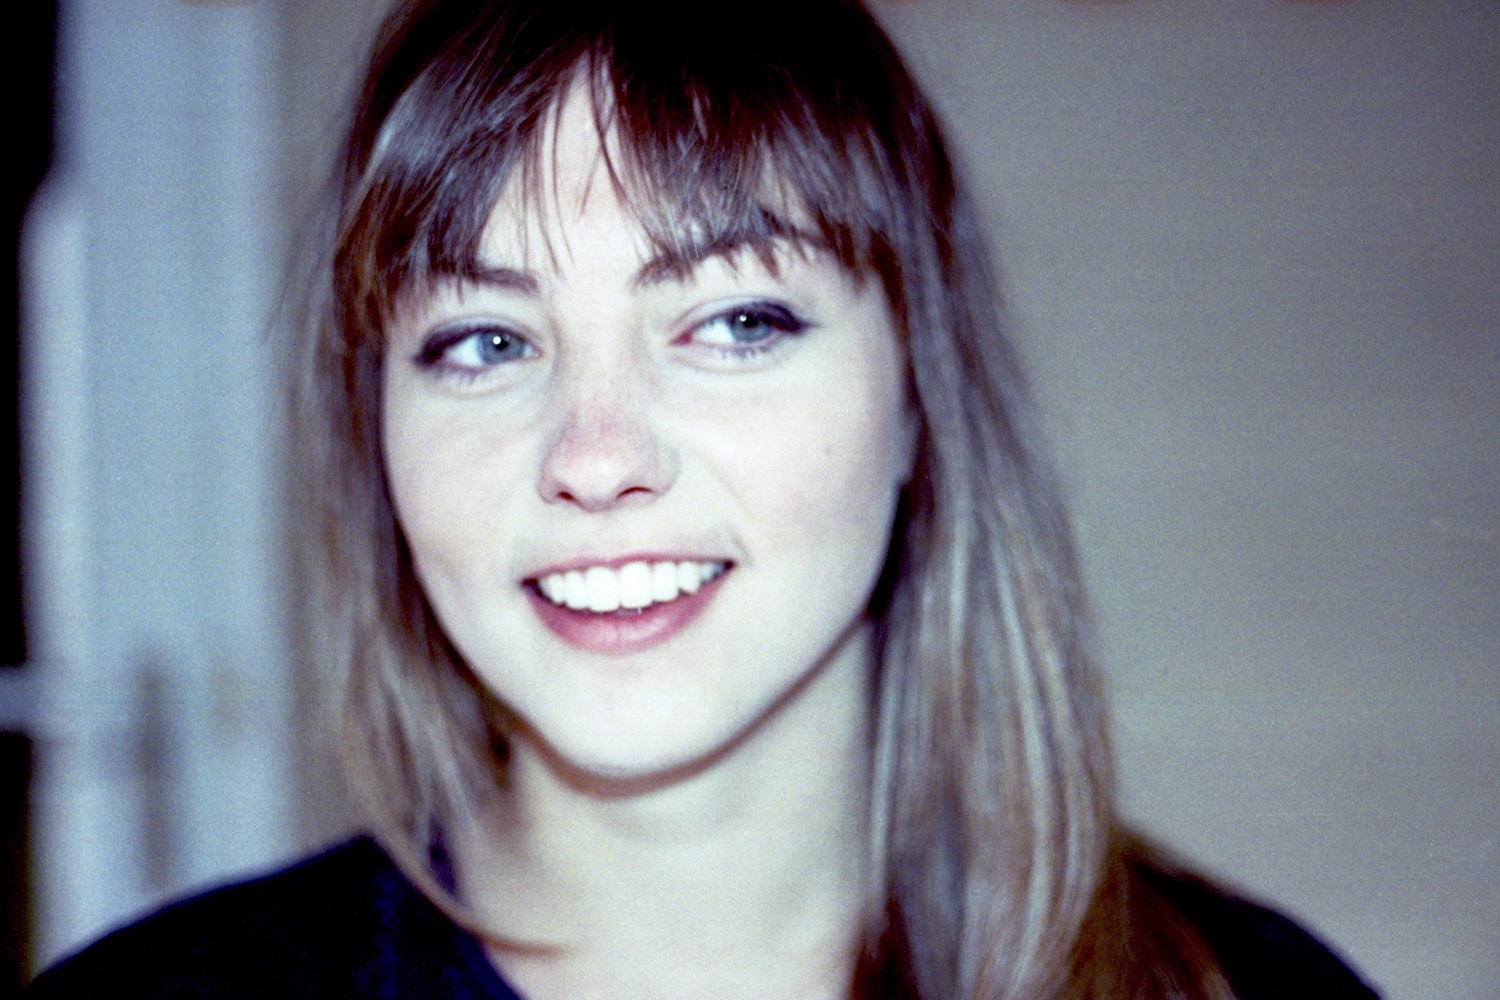 Angel Olsen previews deluxe edition album with ‘May As Well’